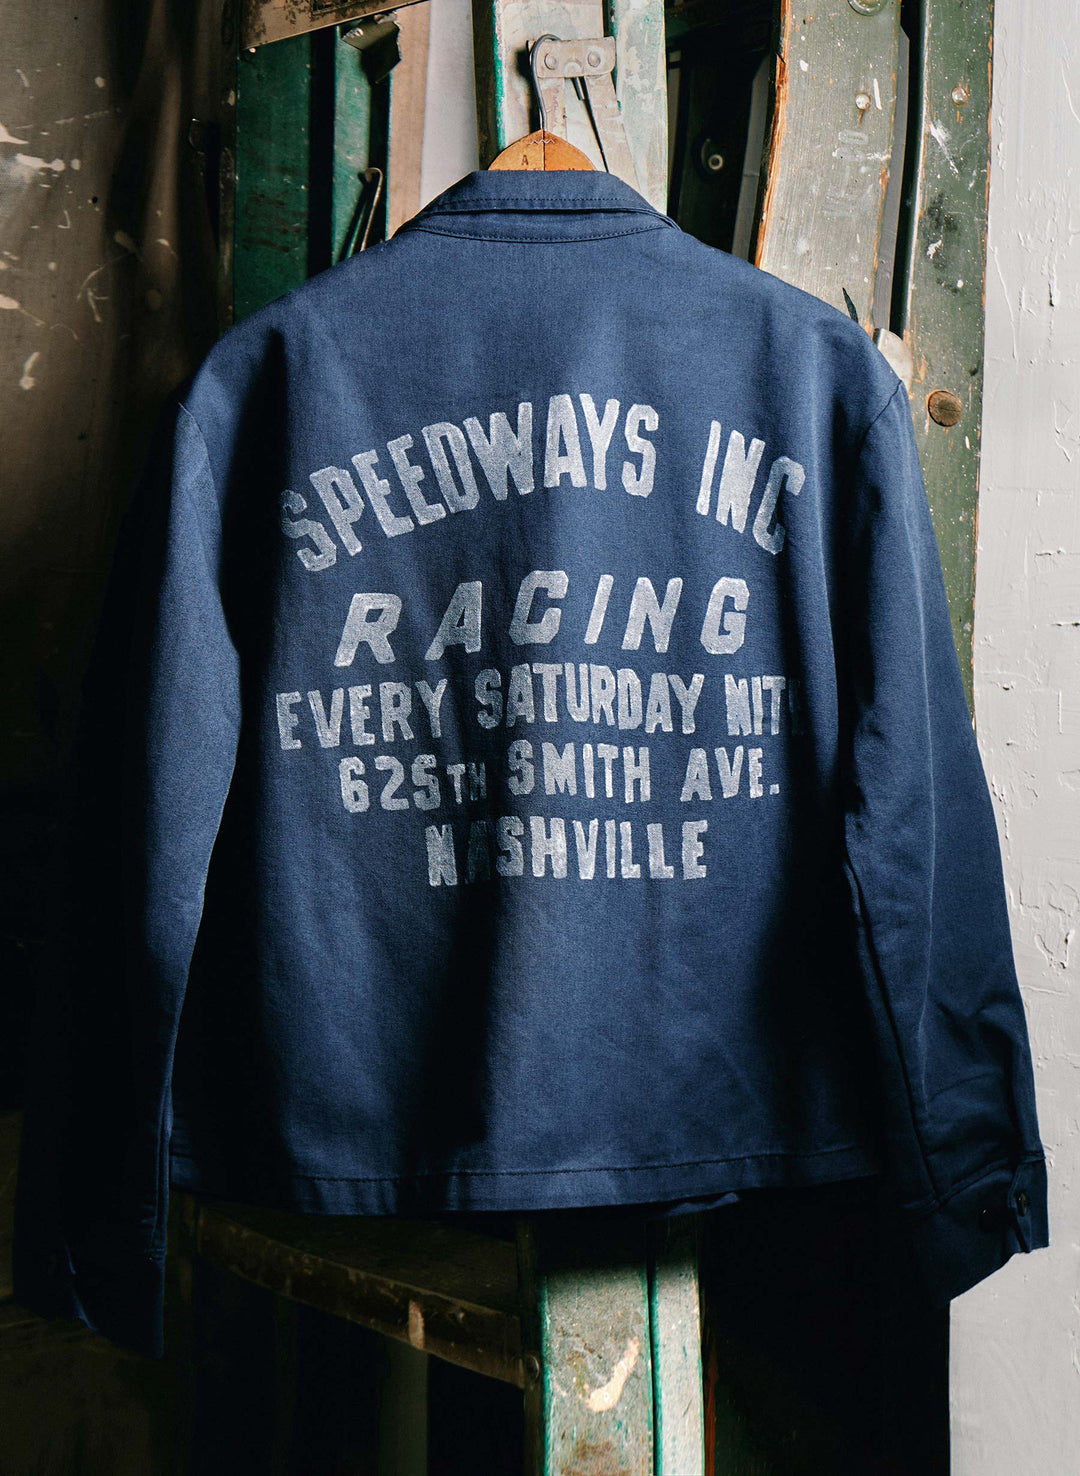 a blue jacket with white text on it